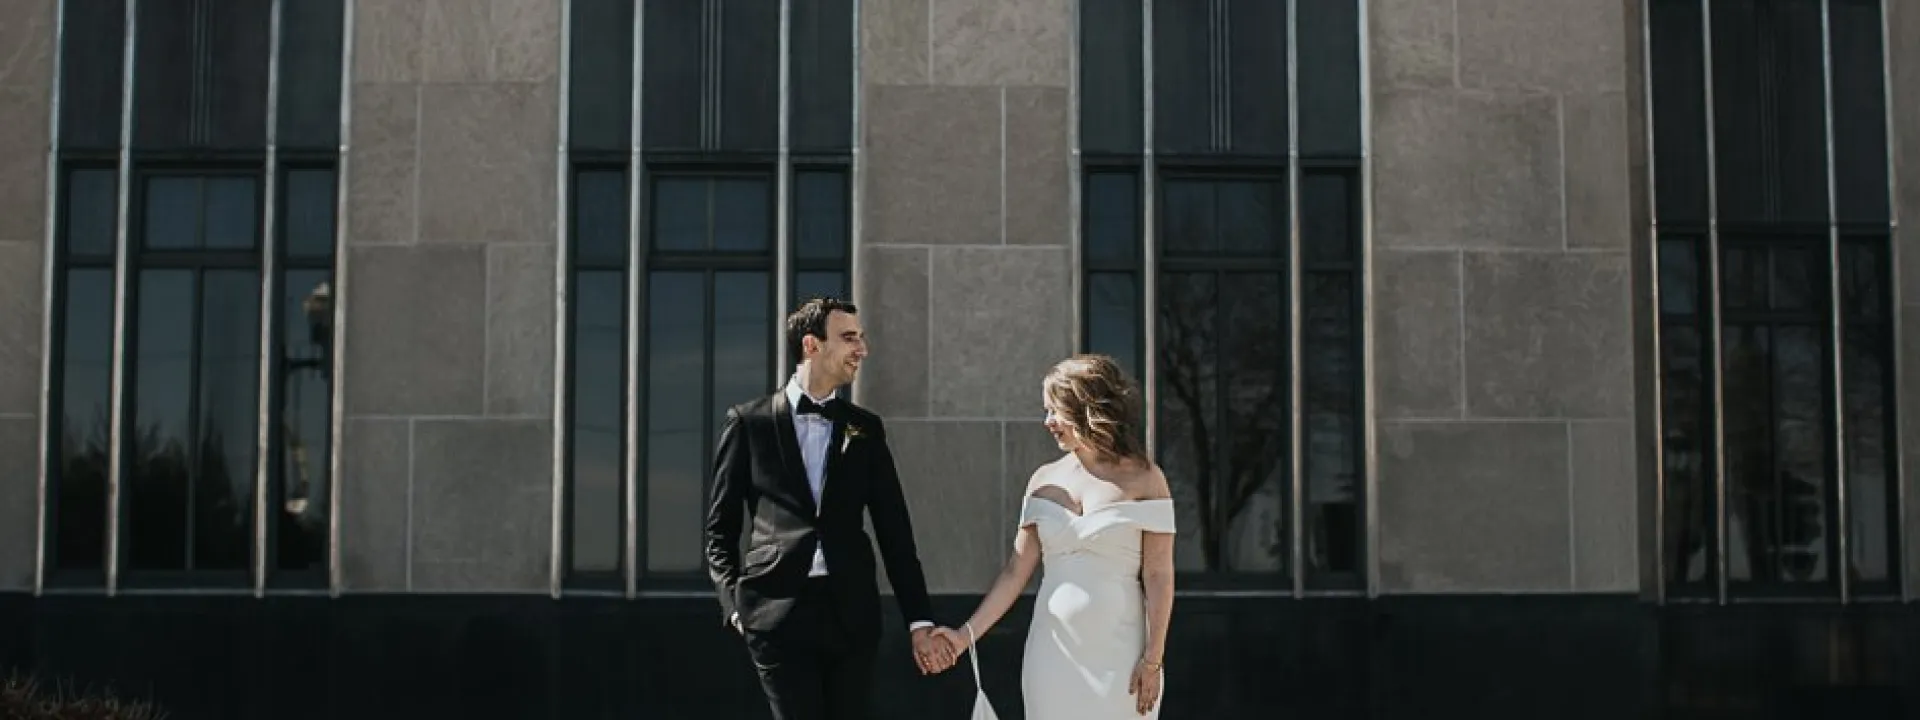 Intimate Wedding at the James J. Hill Library in Minnesota